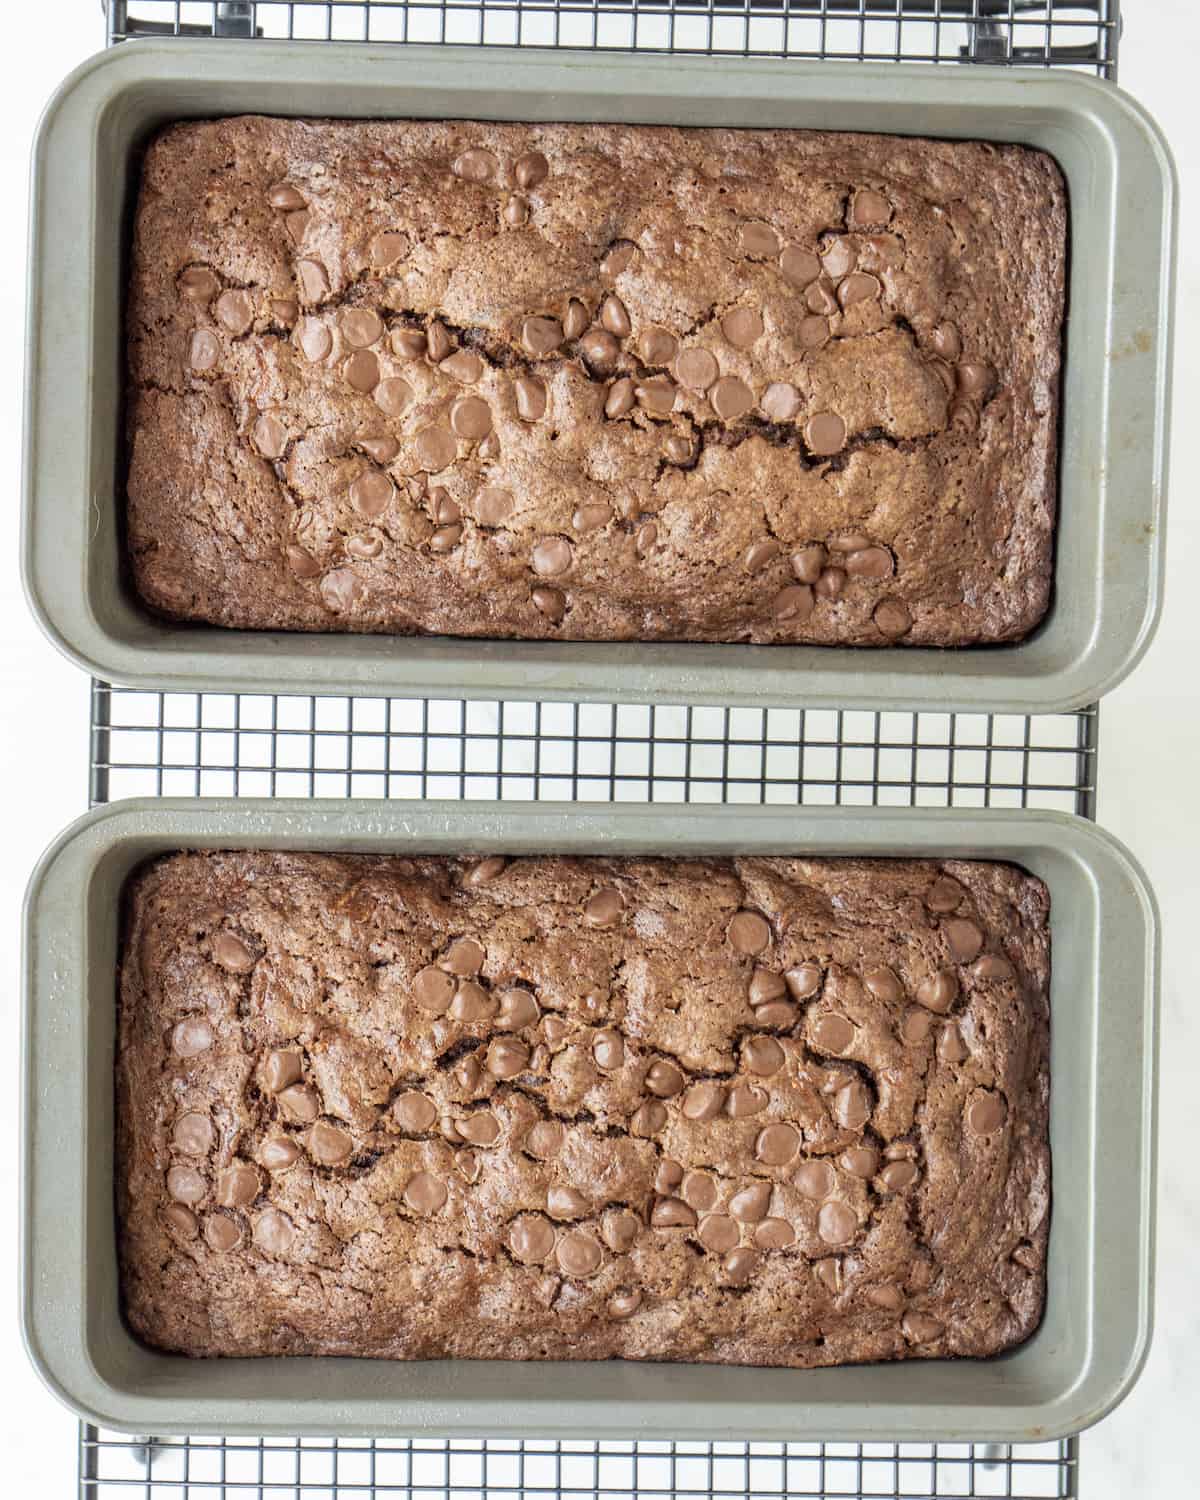 Two loaf pans on a wire rack with baked double chocolate chip zucchini bread.